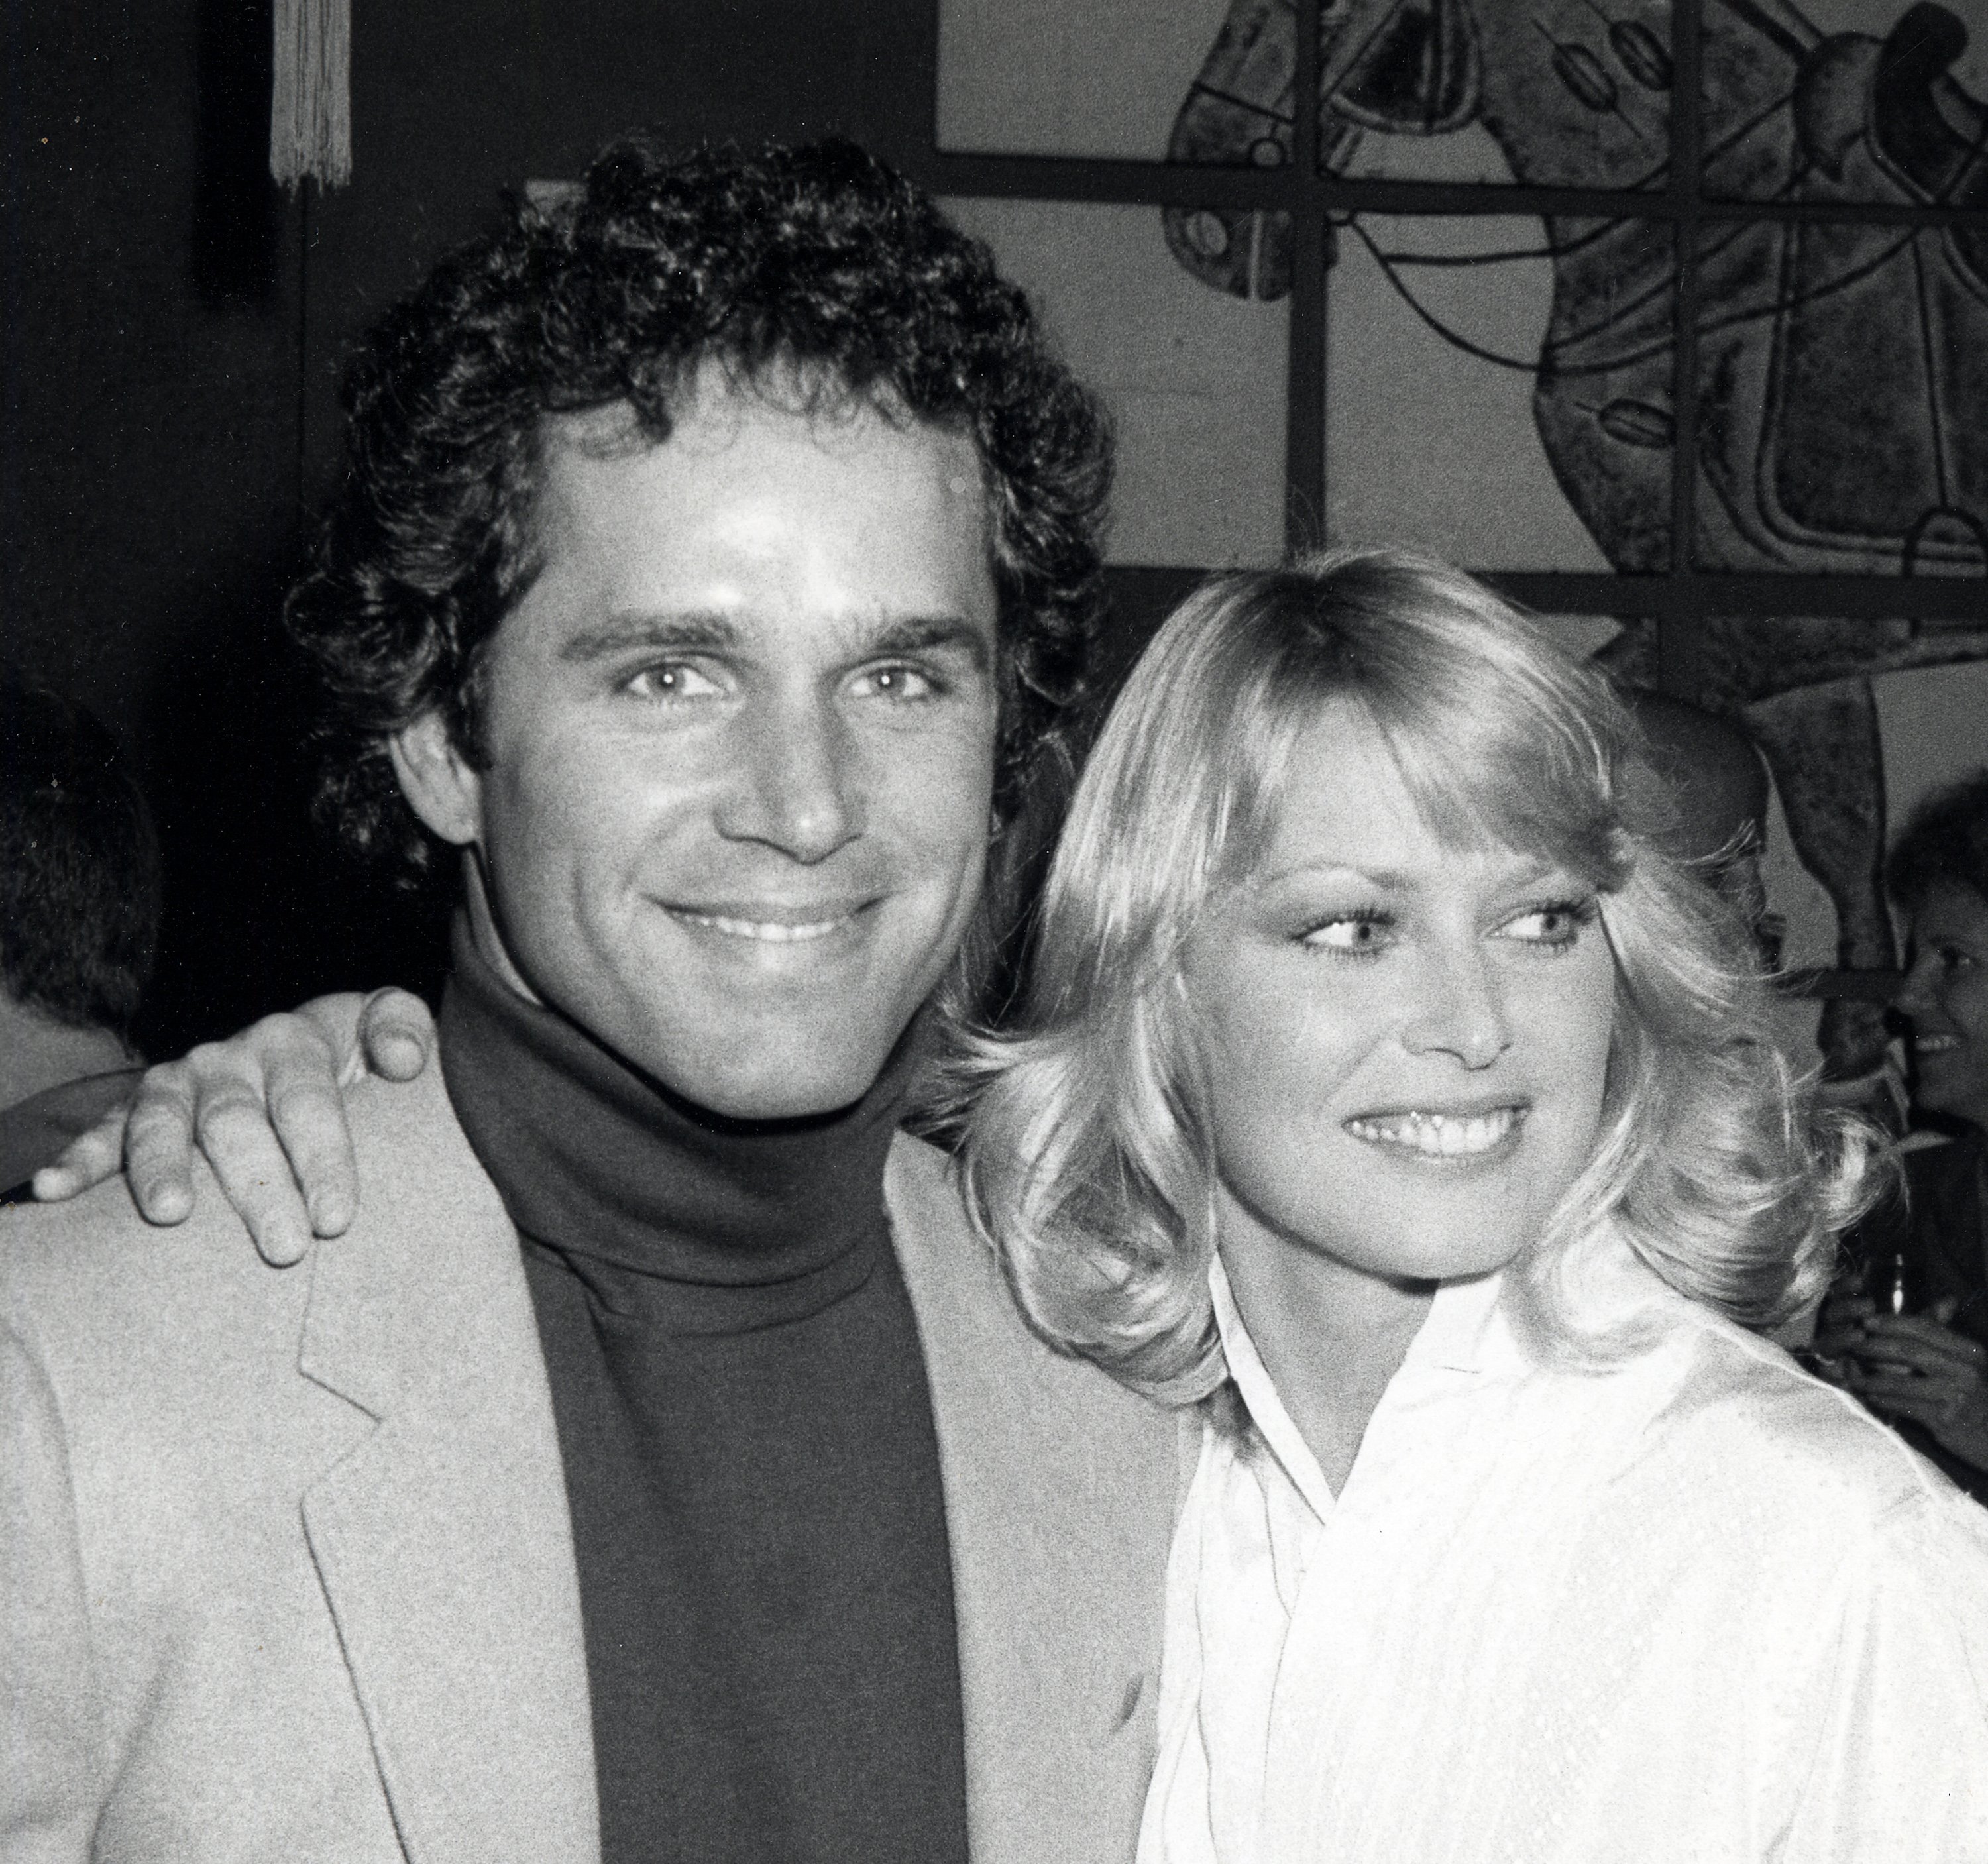 Gregory Harrison and Randi Oakes attend Erik Estrada's surprise birthday party on March 7, 1981, in Santa Monica, California. | Source: Getty Images